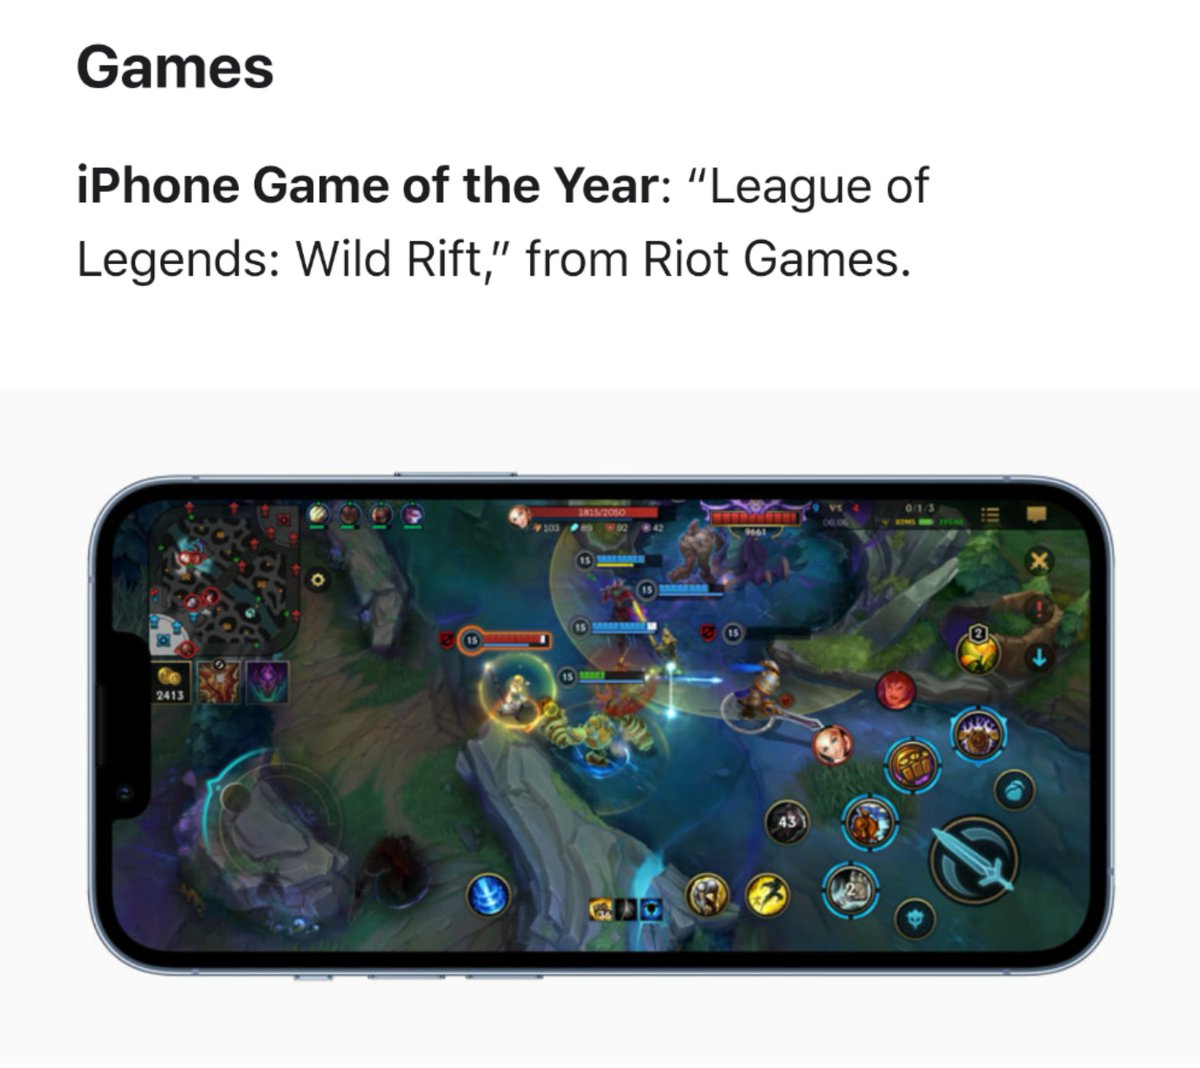 Which is better, Mobile Legends or LoL Wild Rift? - Quora